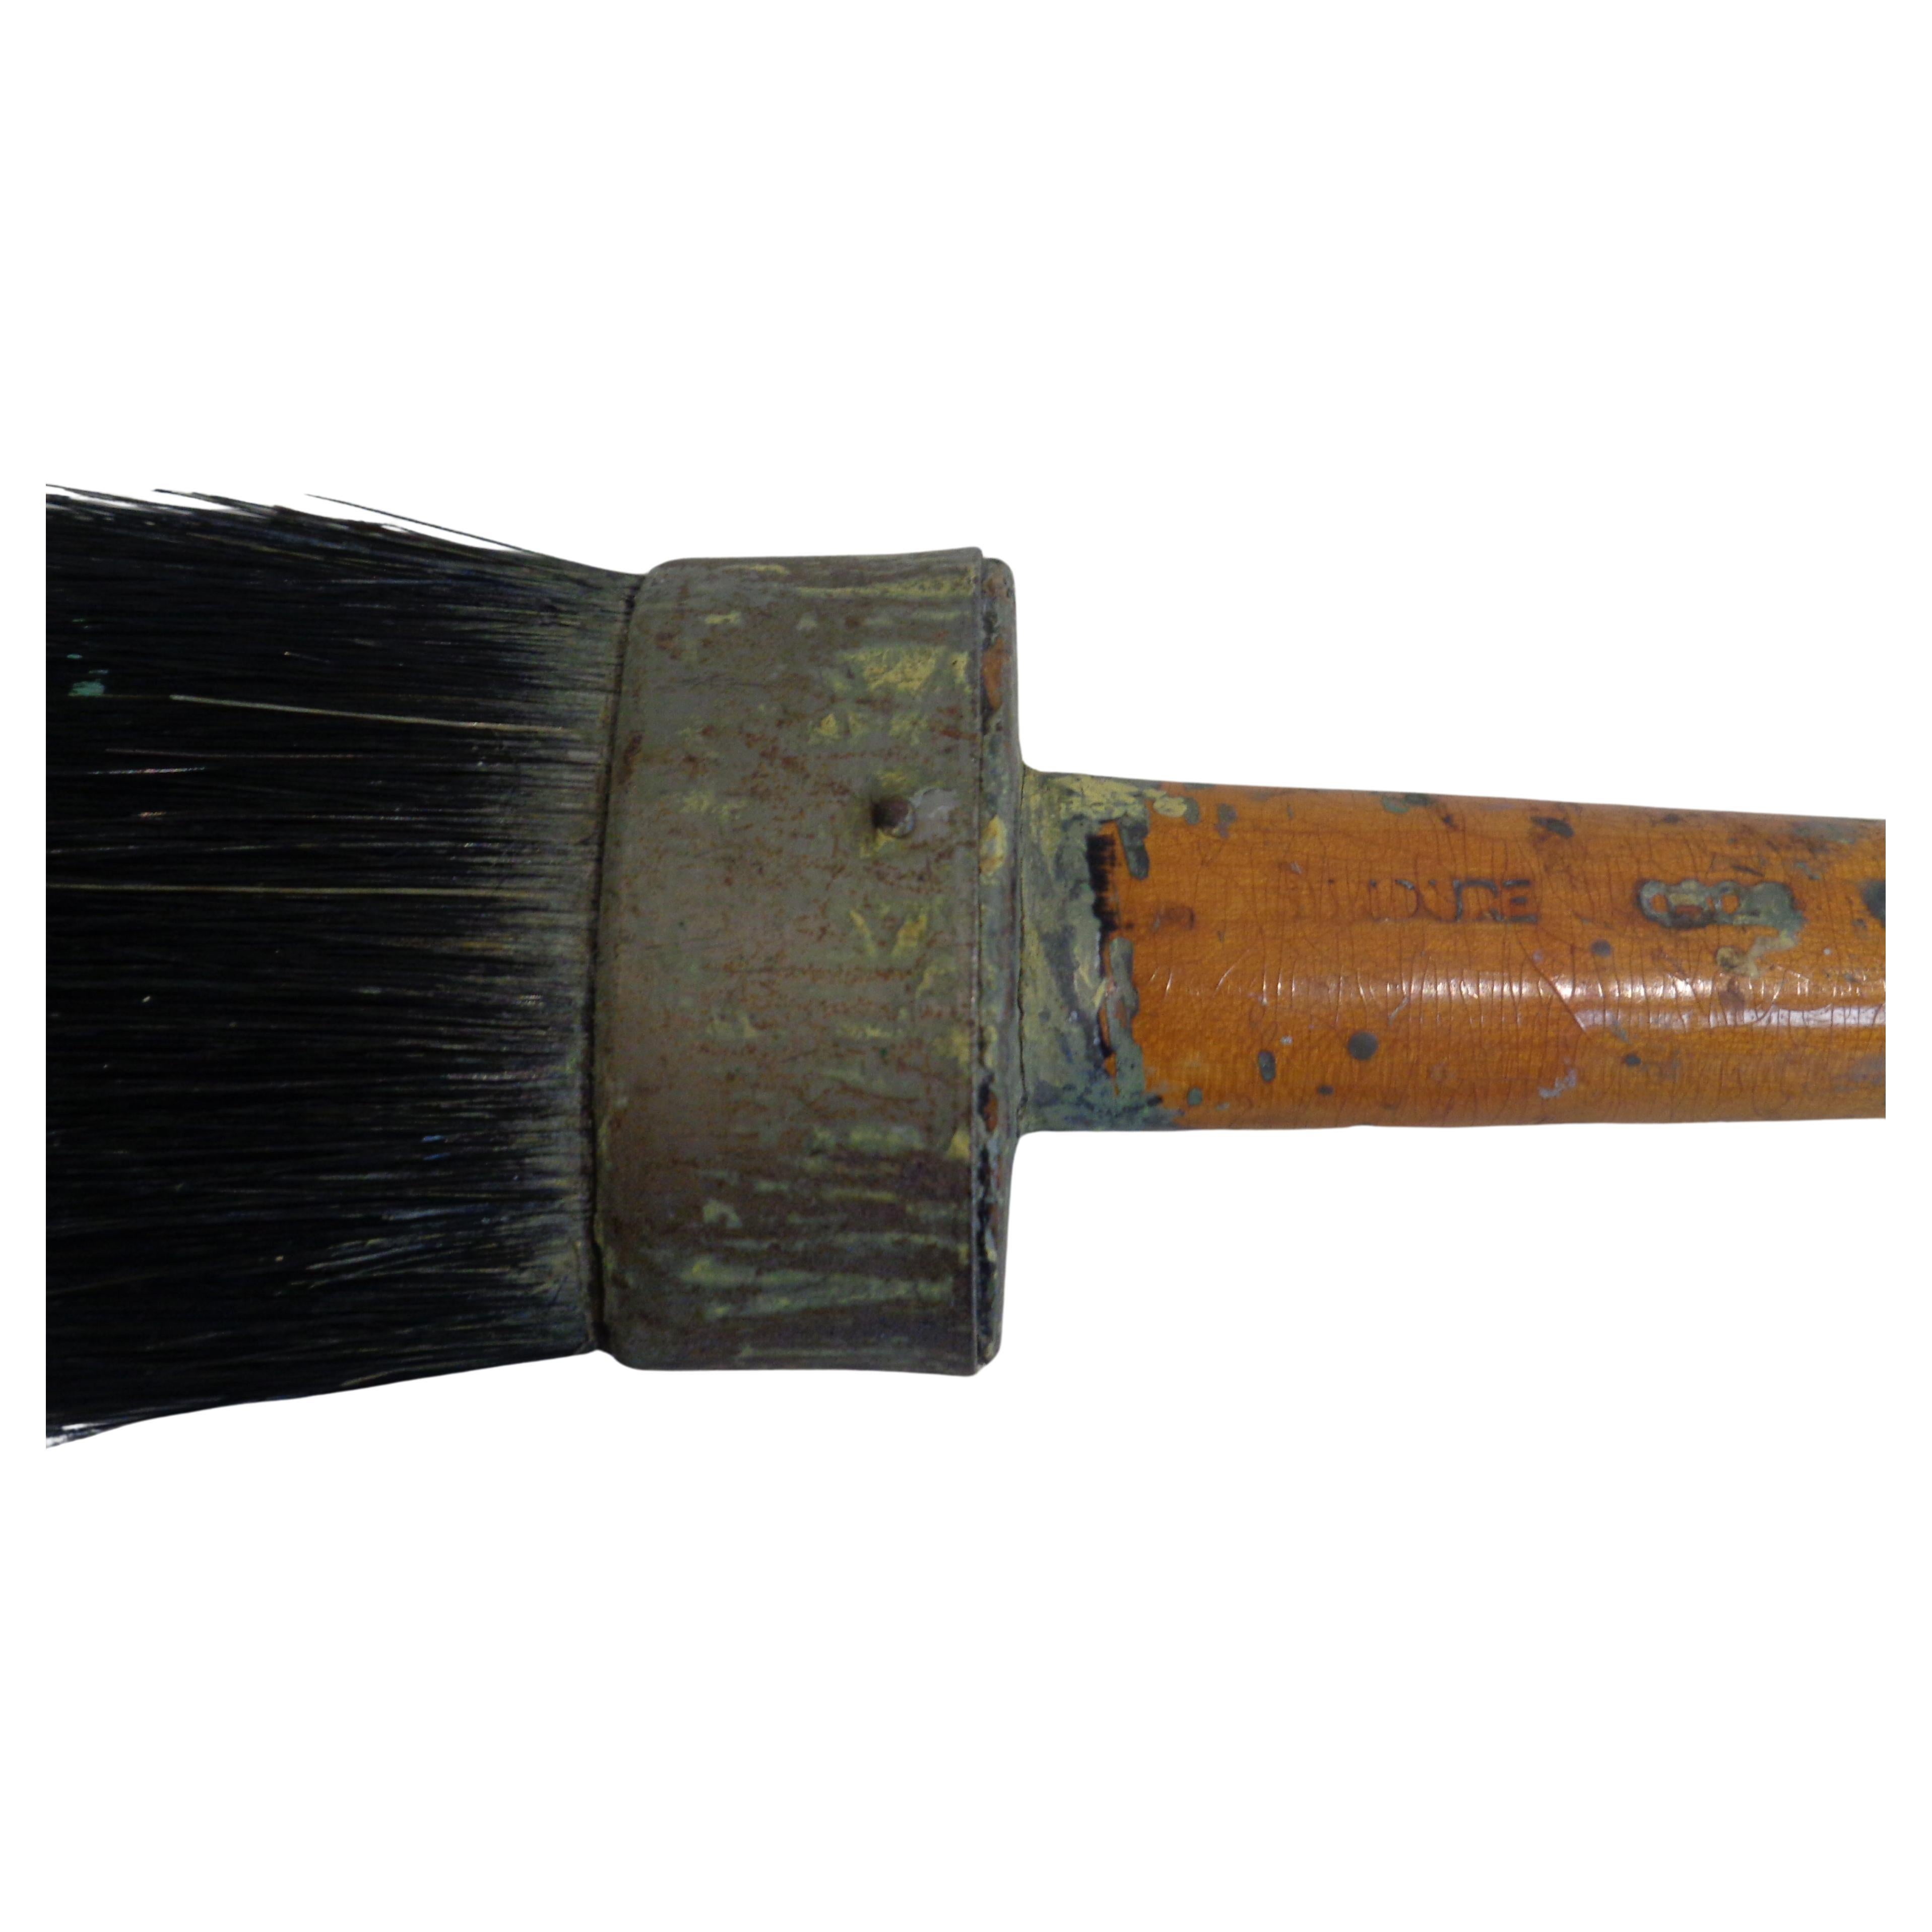 A large antique artist paint brush - perfectly aged rounded oval shaped wood handle w/ large horsehair bristles encased in riveted metal. Incise signed on handle but cannot decipher. Likely French in origin. Beautiful old brush. Look at all pictures